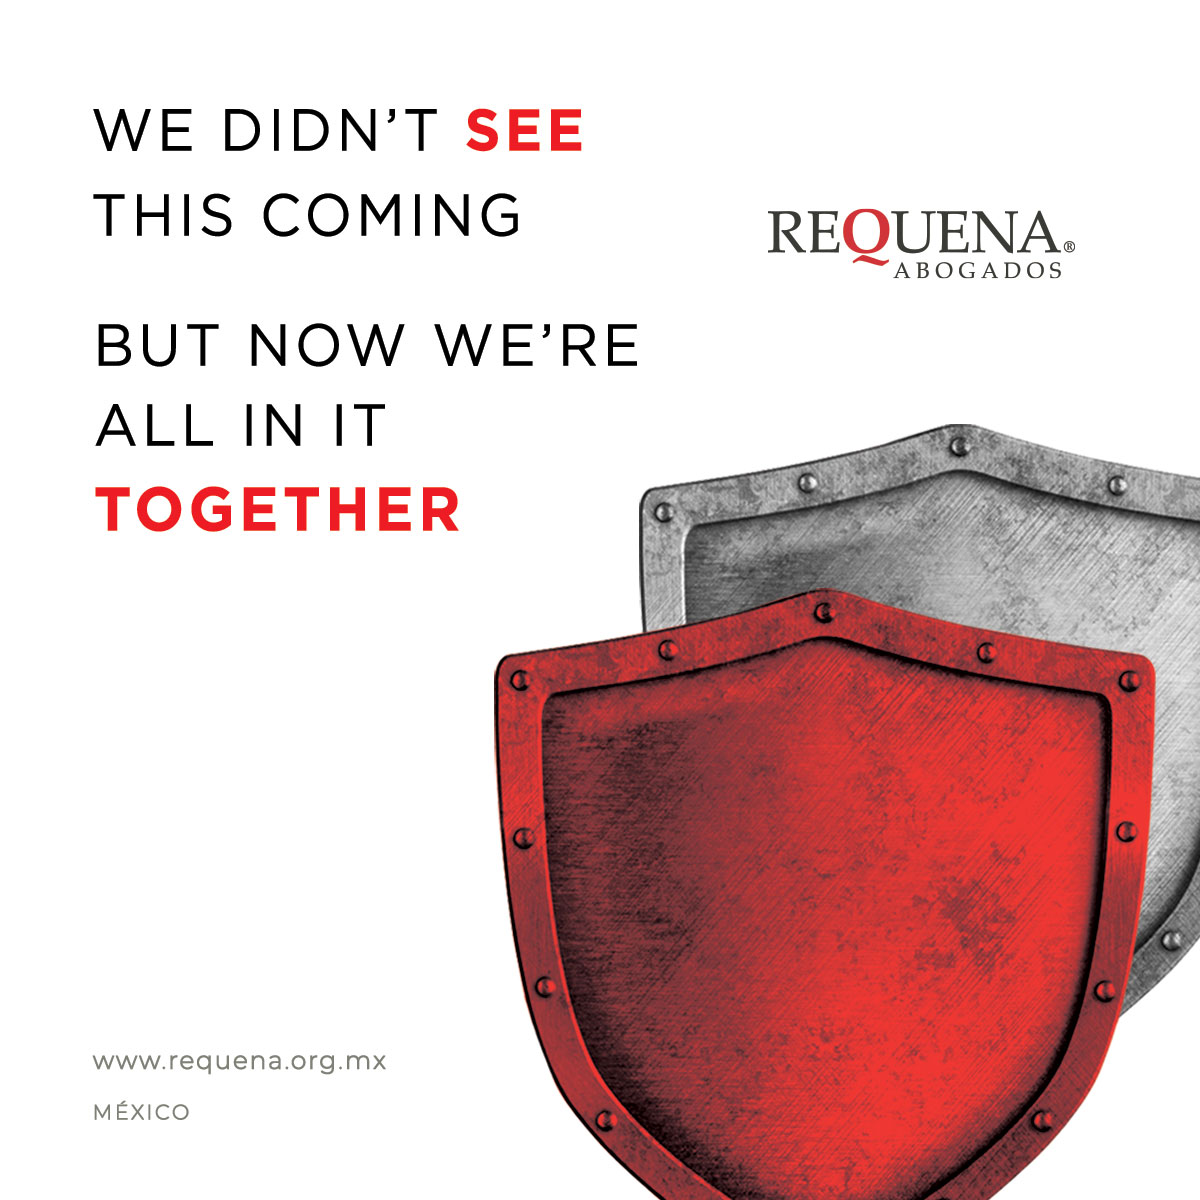 We didn't see this coming, but now we're all in it together | Covid-19 | Requena Abogados